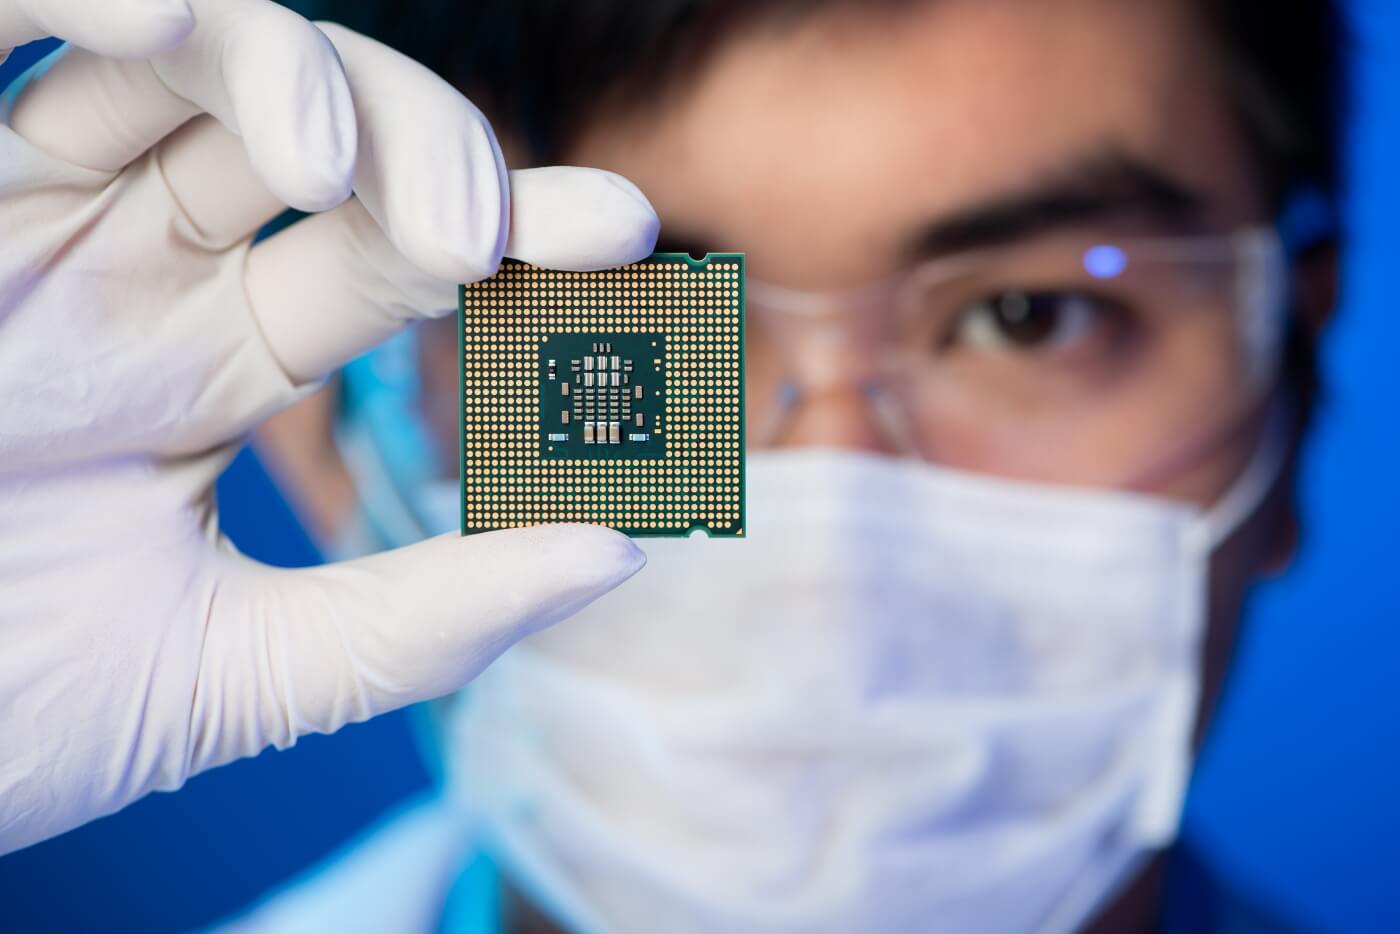 Intel recaptures title of world's largest semiconductor vendor by revenue